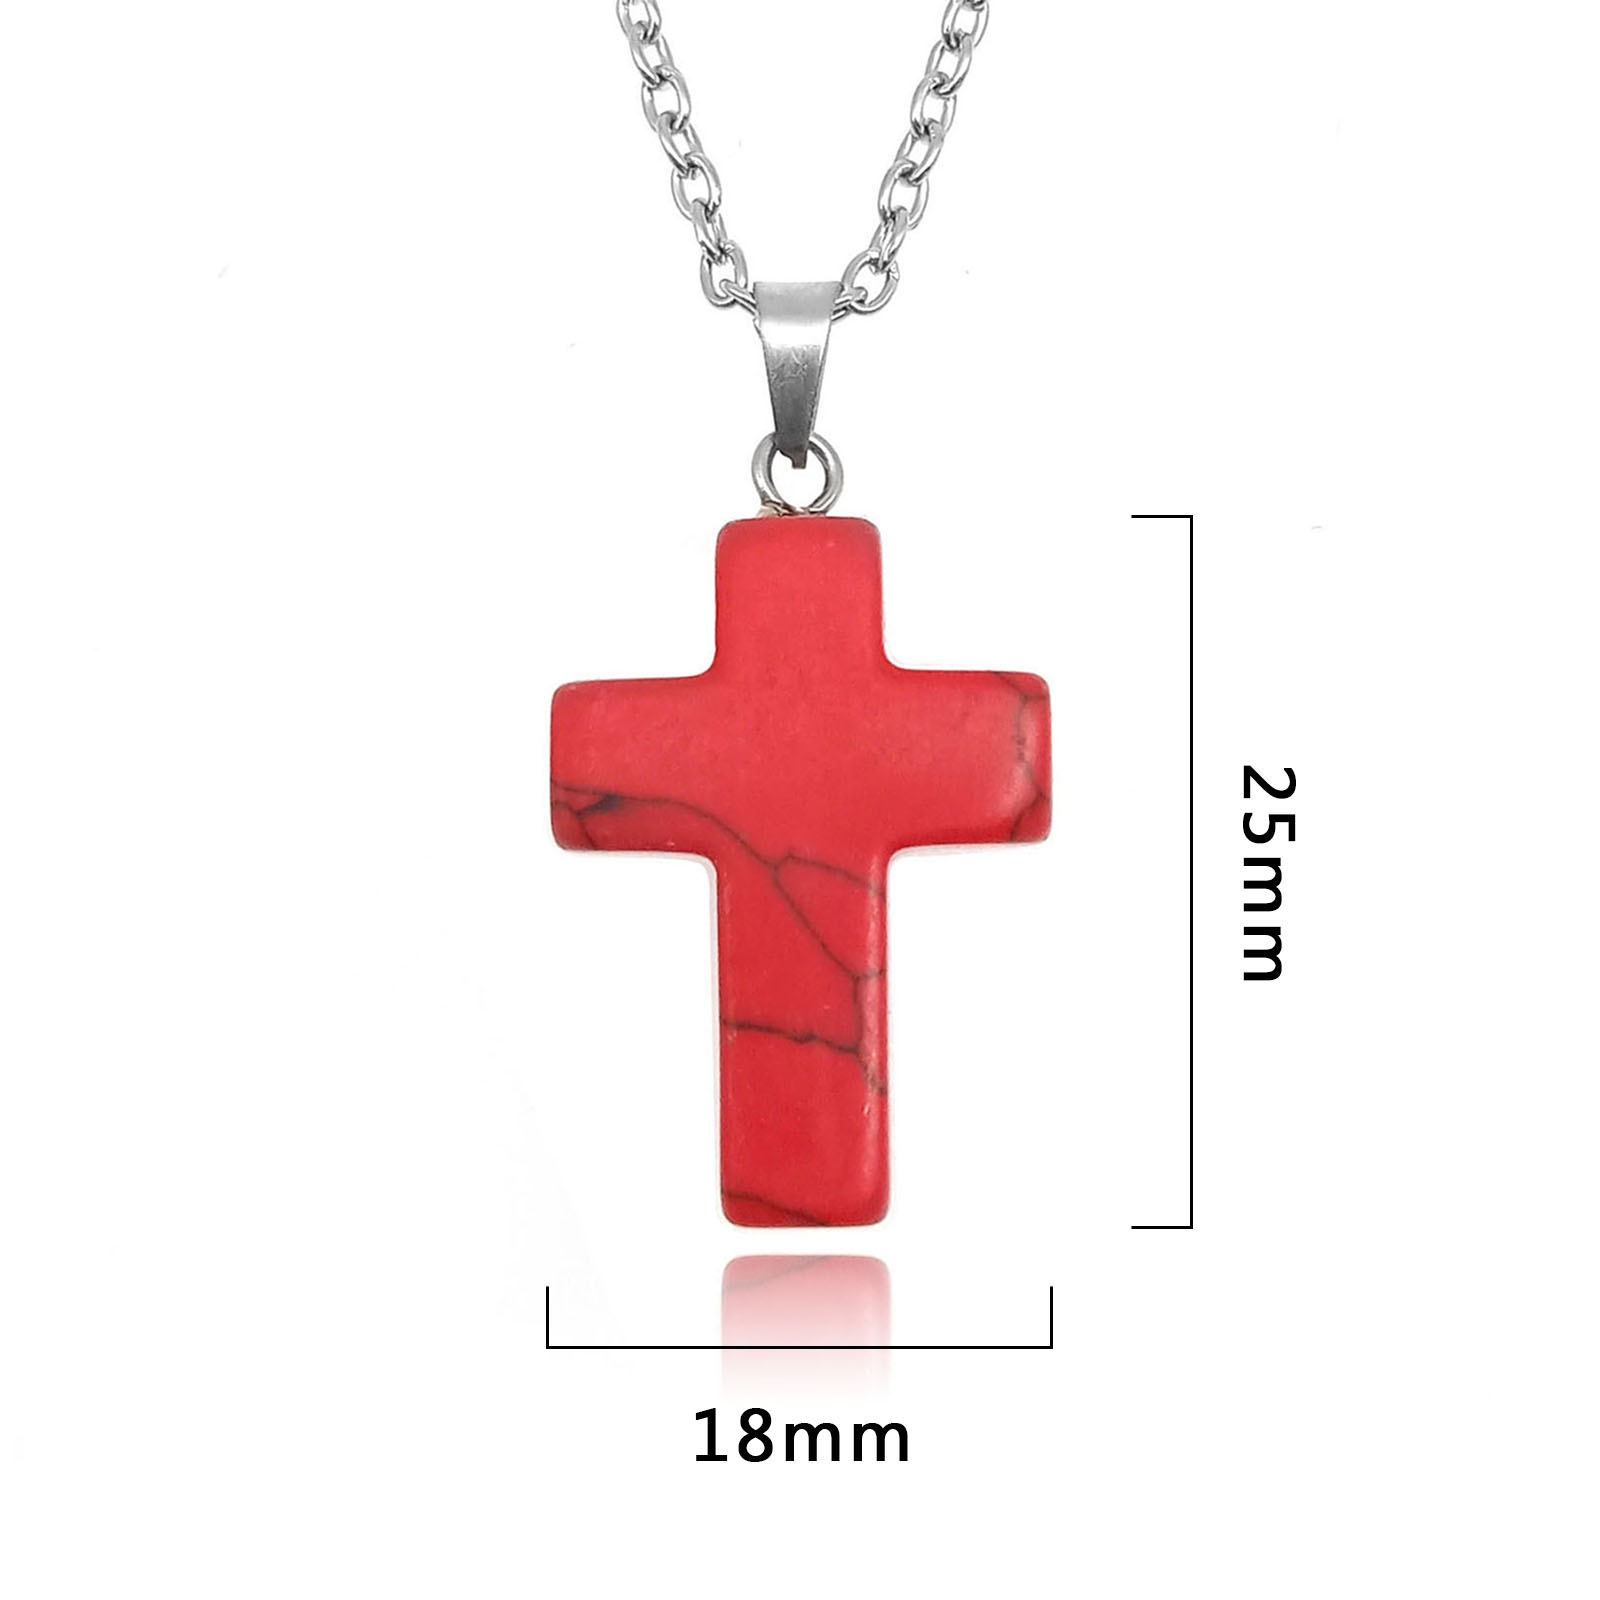 1:The pendant is about 18mm long, about 25mm high, about 5mm thick, and the chain is about 50cm long